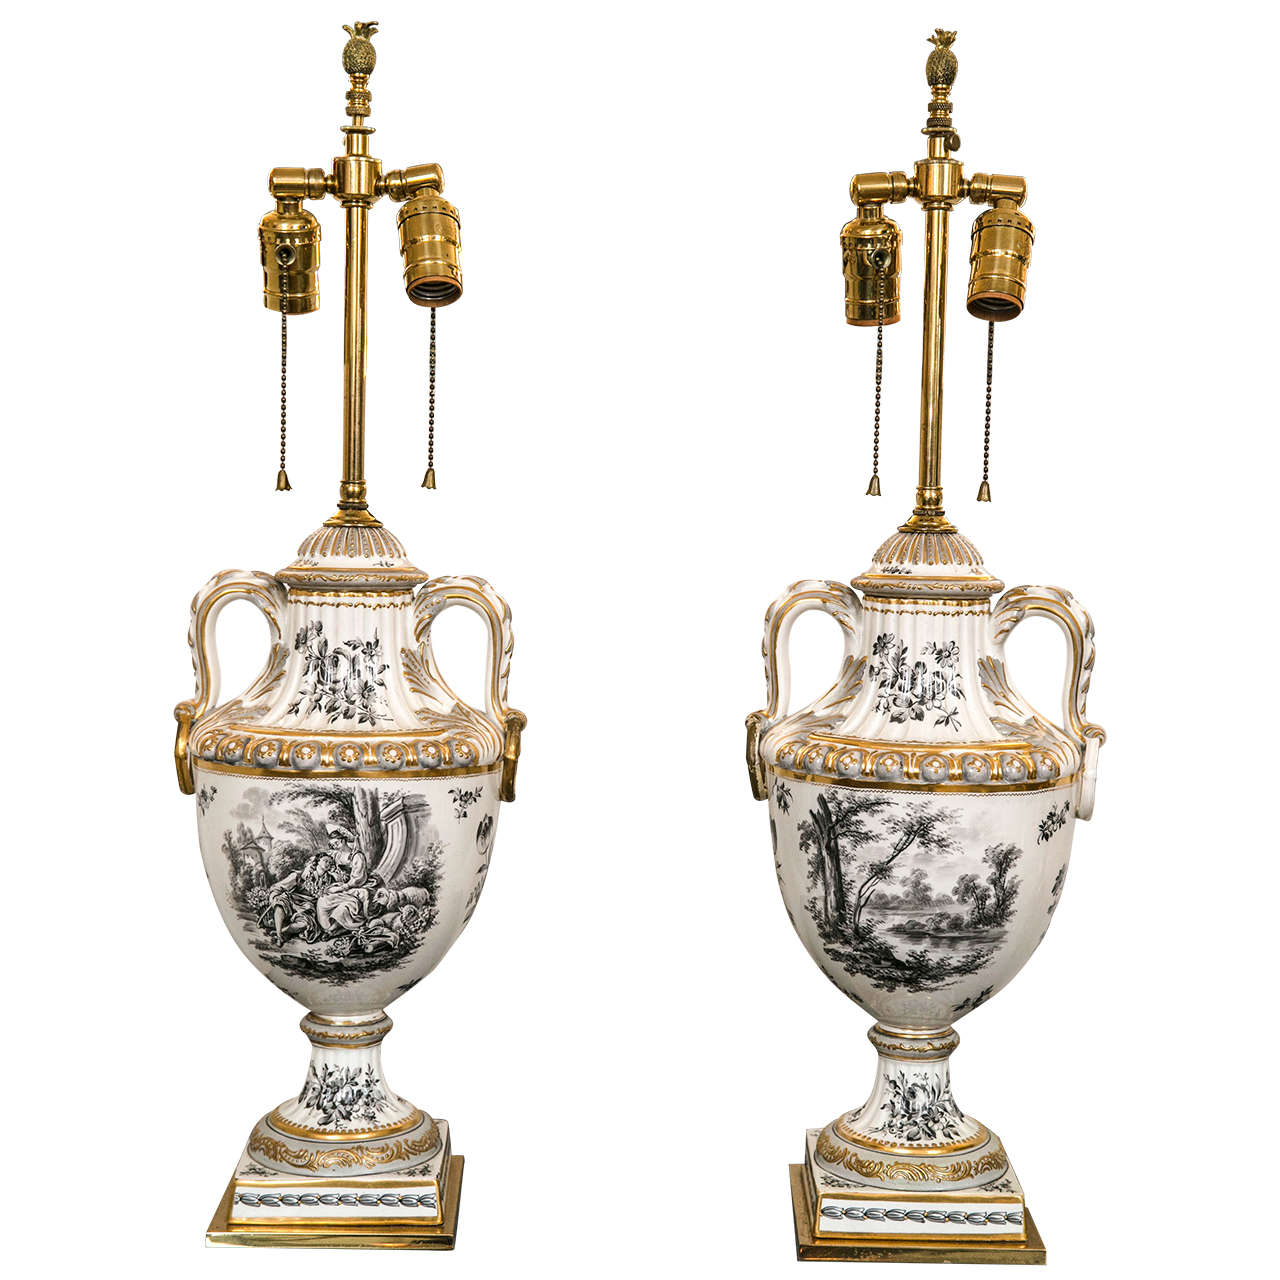 Pair of 19th Century French Porcelain Urns as Table Lamps